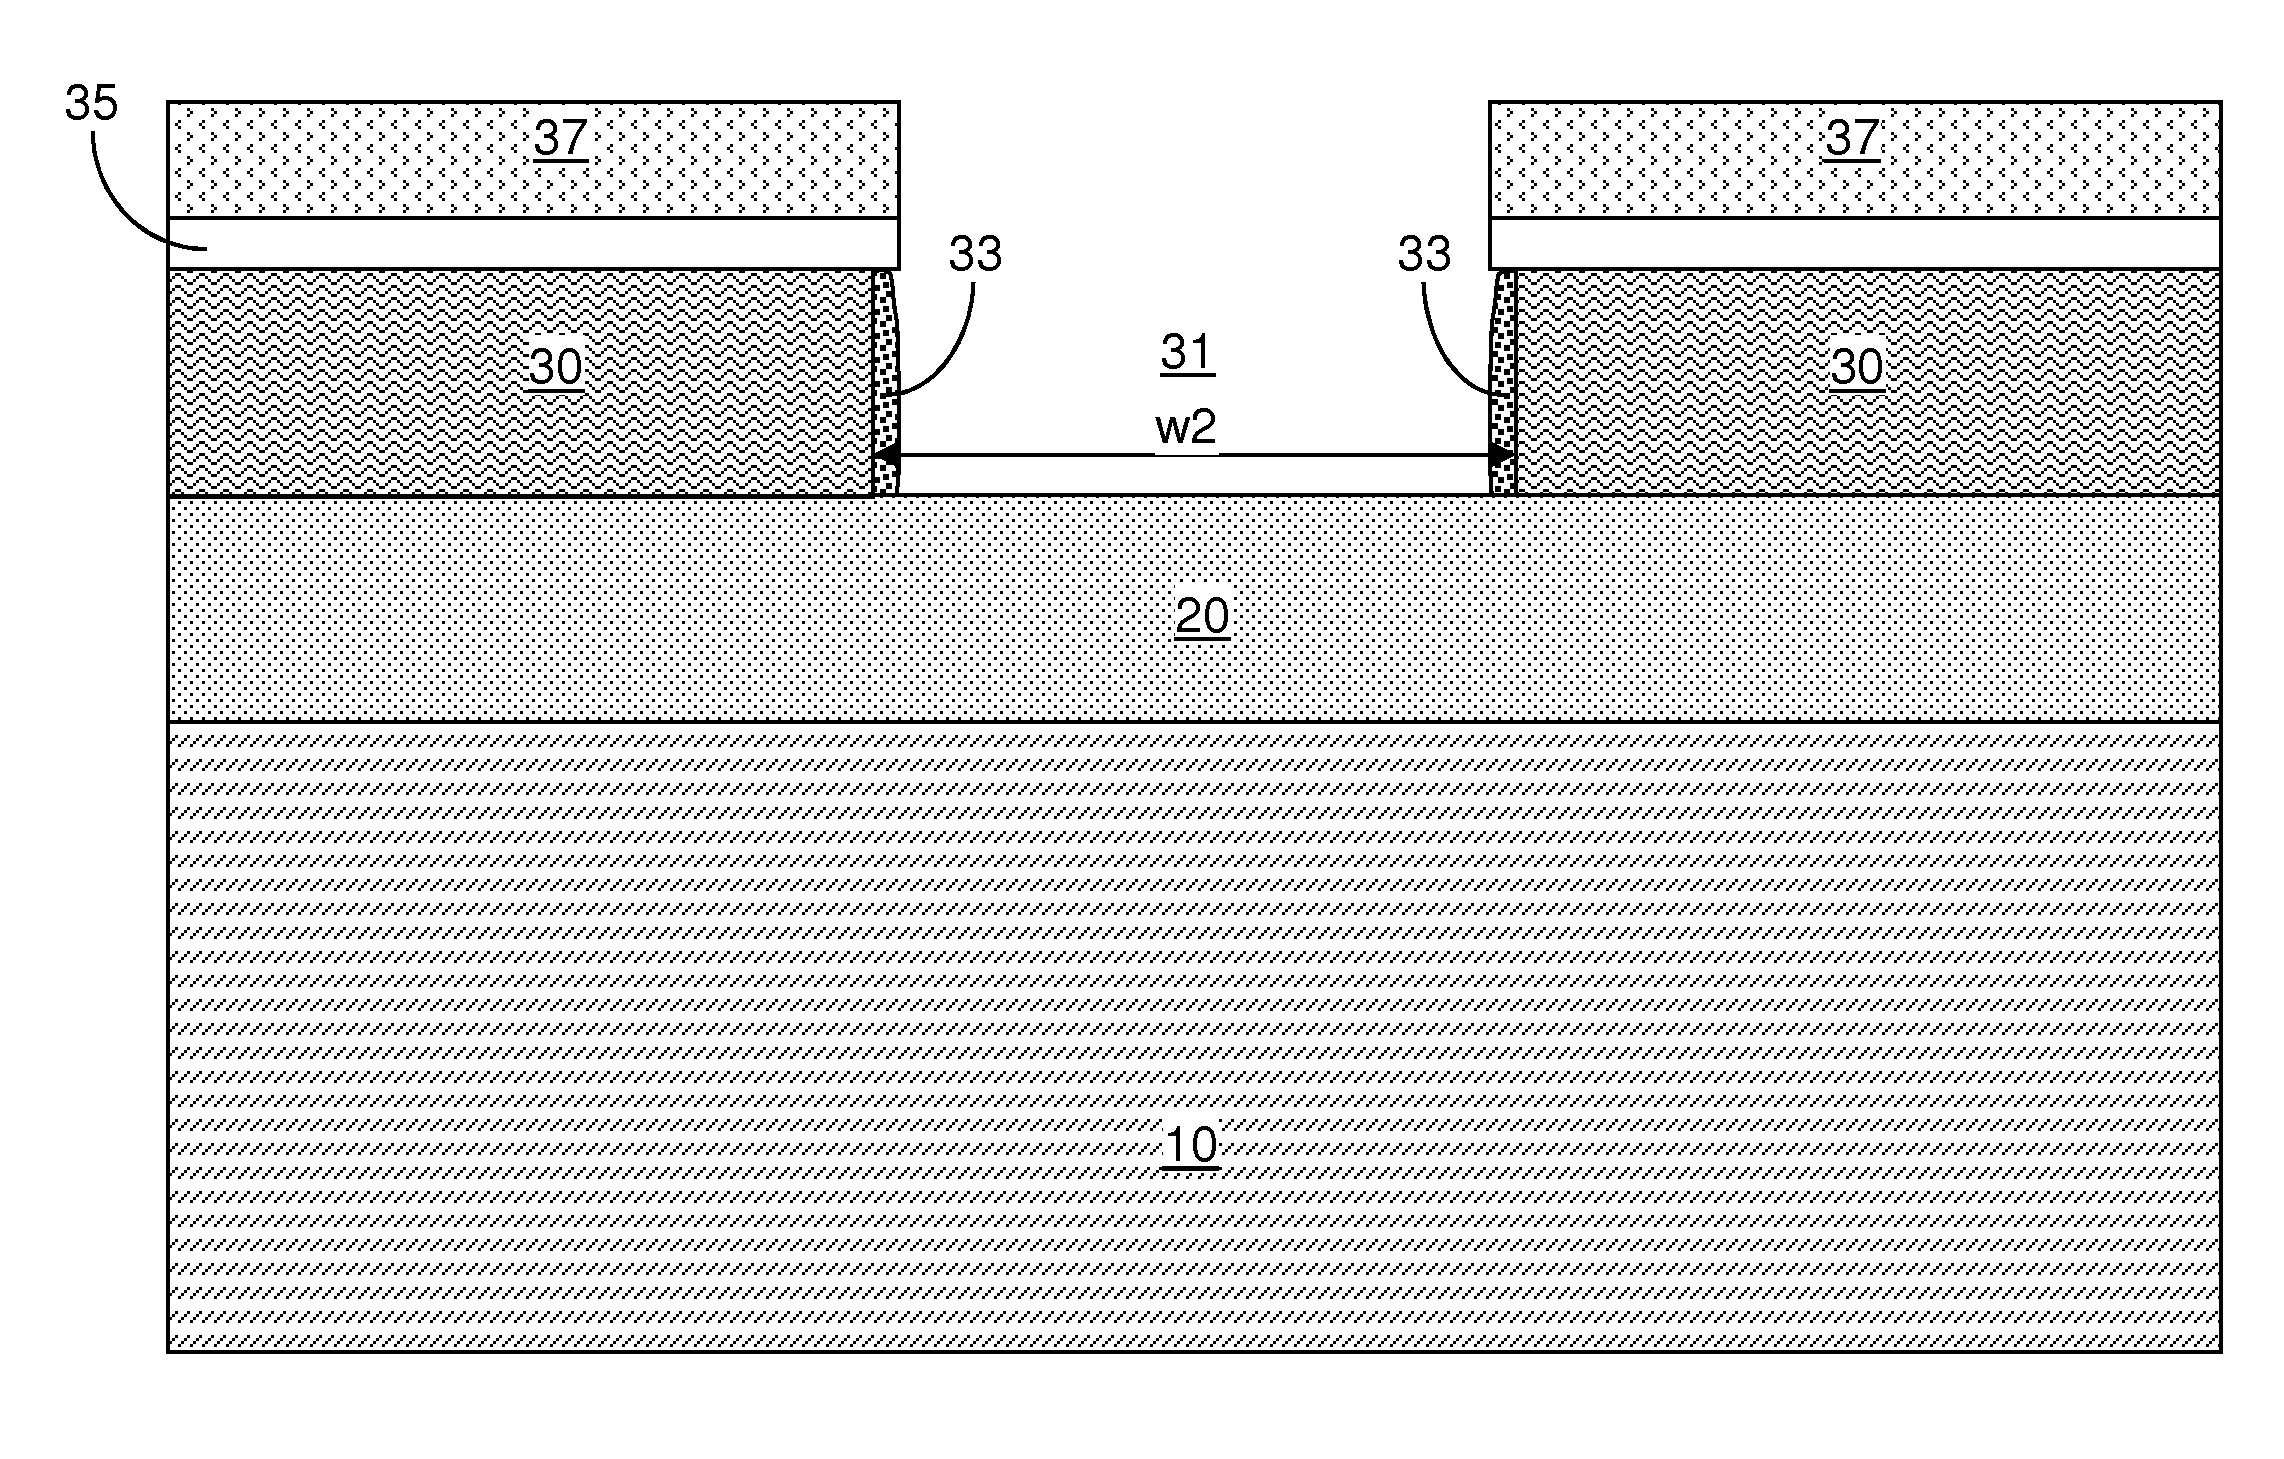 High fidelity patterning employing a fluorohydrocarbon-containing polymer